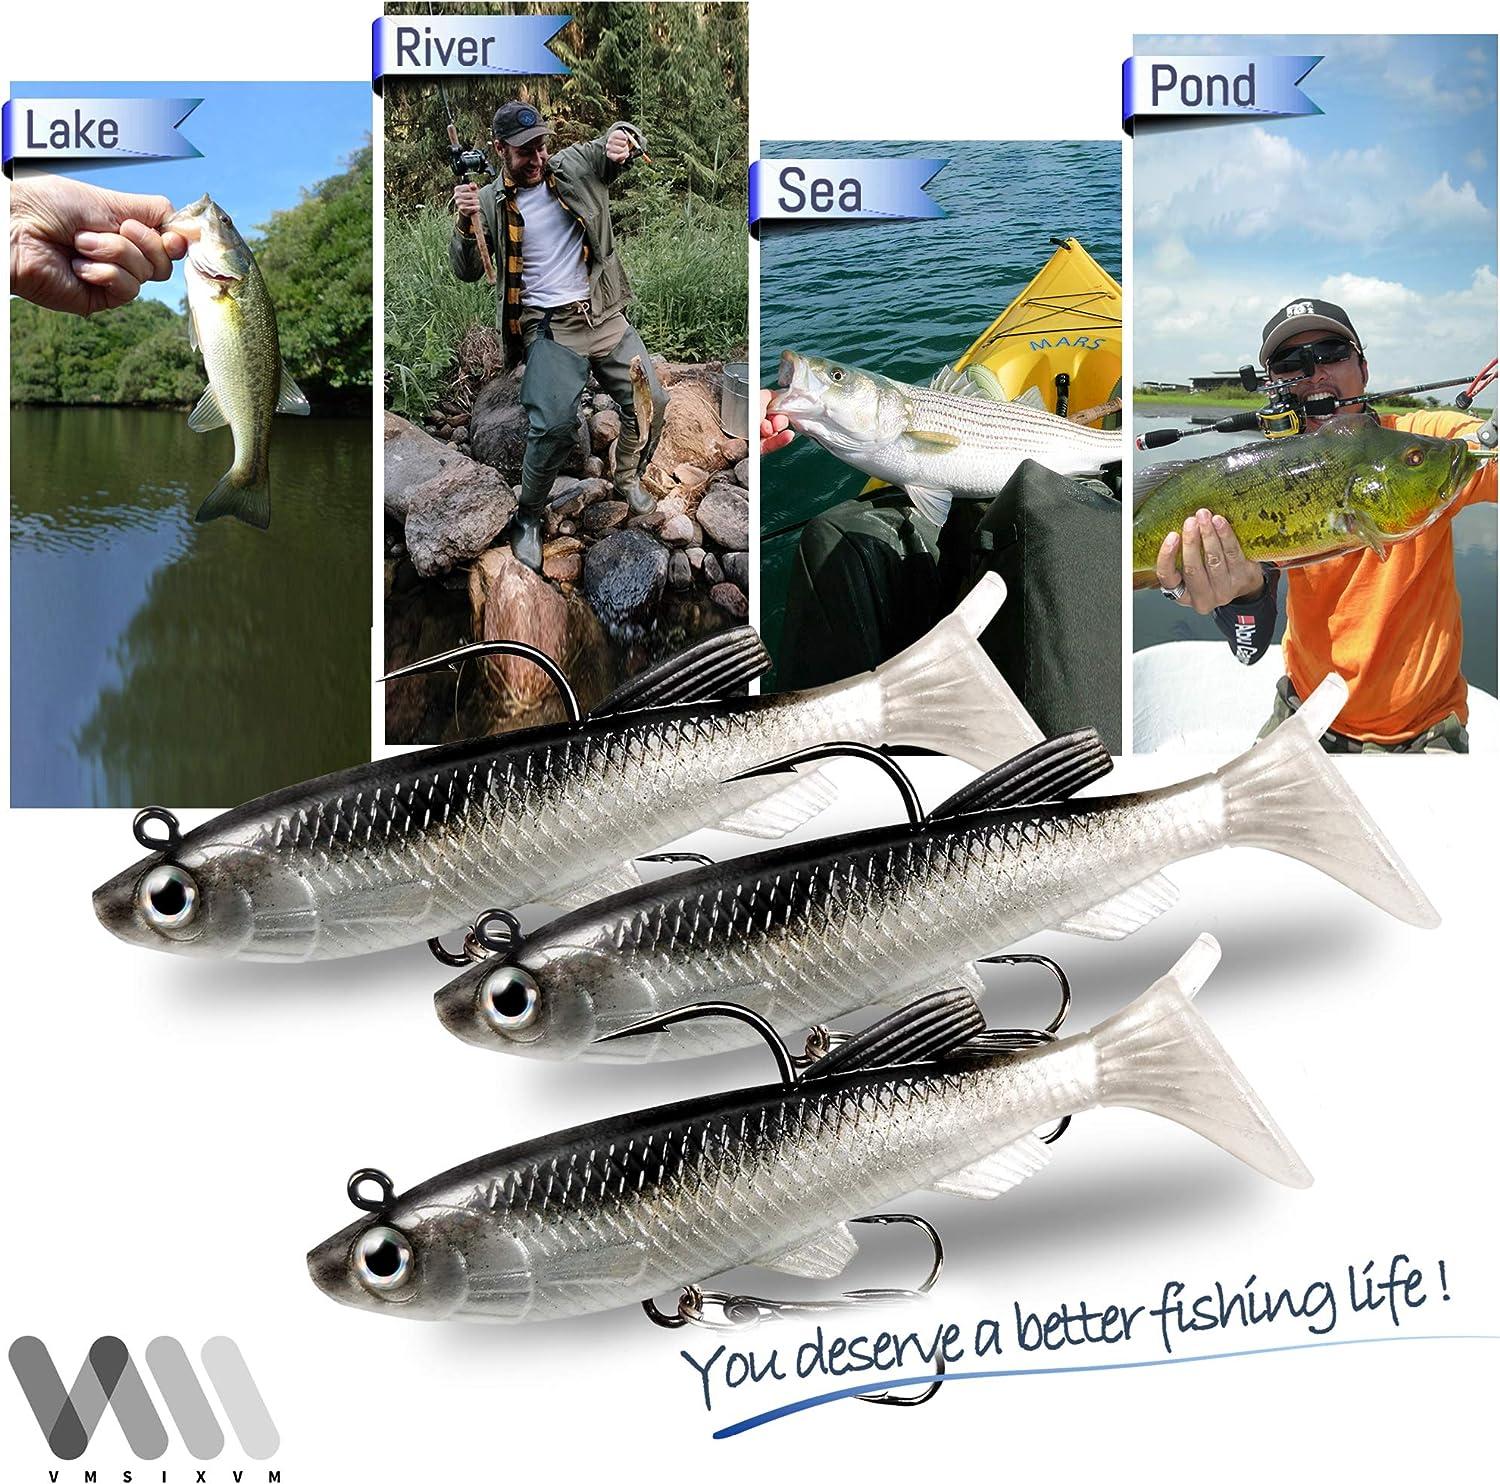 Fishing Lures for Bass, VMSIXVM Fishing Jig Head Swim Shad Lure, Soft  Plastic Swimbaits with Paddle Tail, Trout Bass Sinking Baits Kit for  Saltwater/Freshwater, Fishing Gear and Fishing Gifts A2-Weedness Pre Rigged